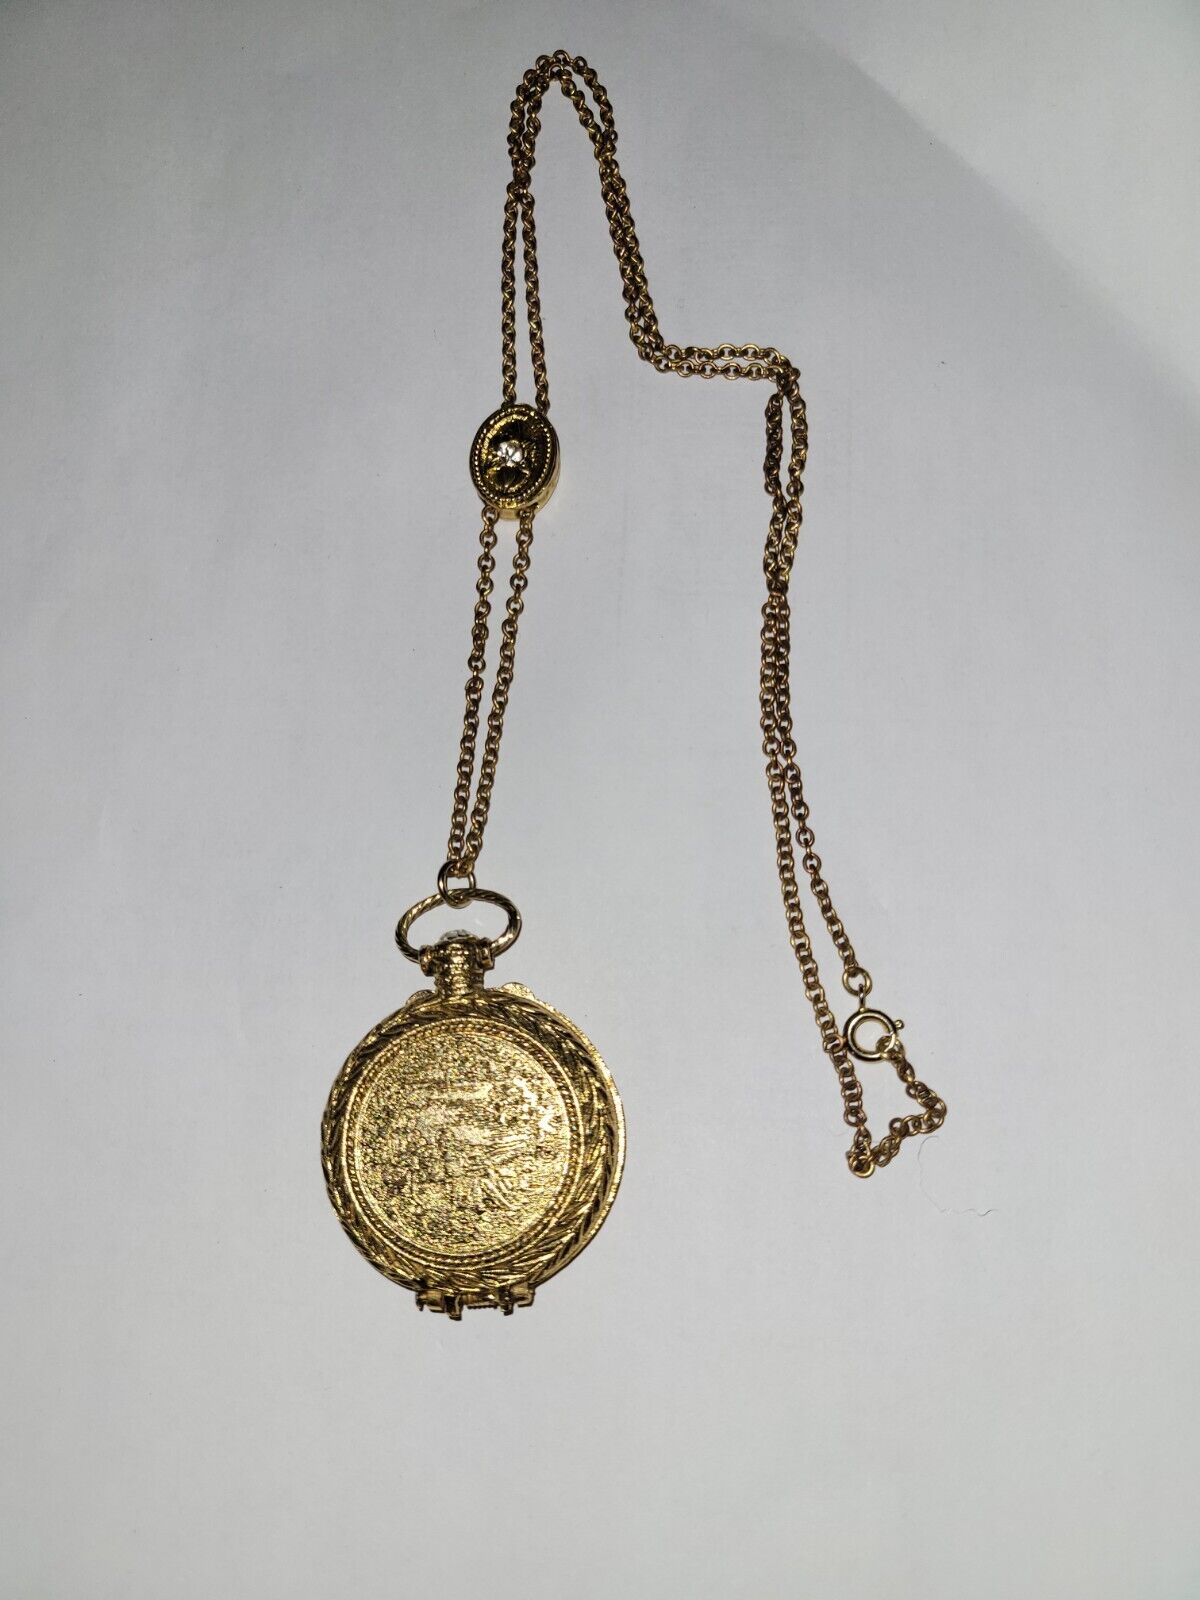 Vtg 1950's Max Factor Goldtone Locket With Chain 'Precious Time' Creme Perfume